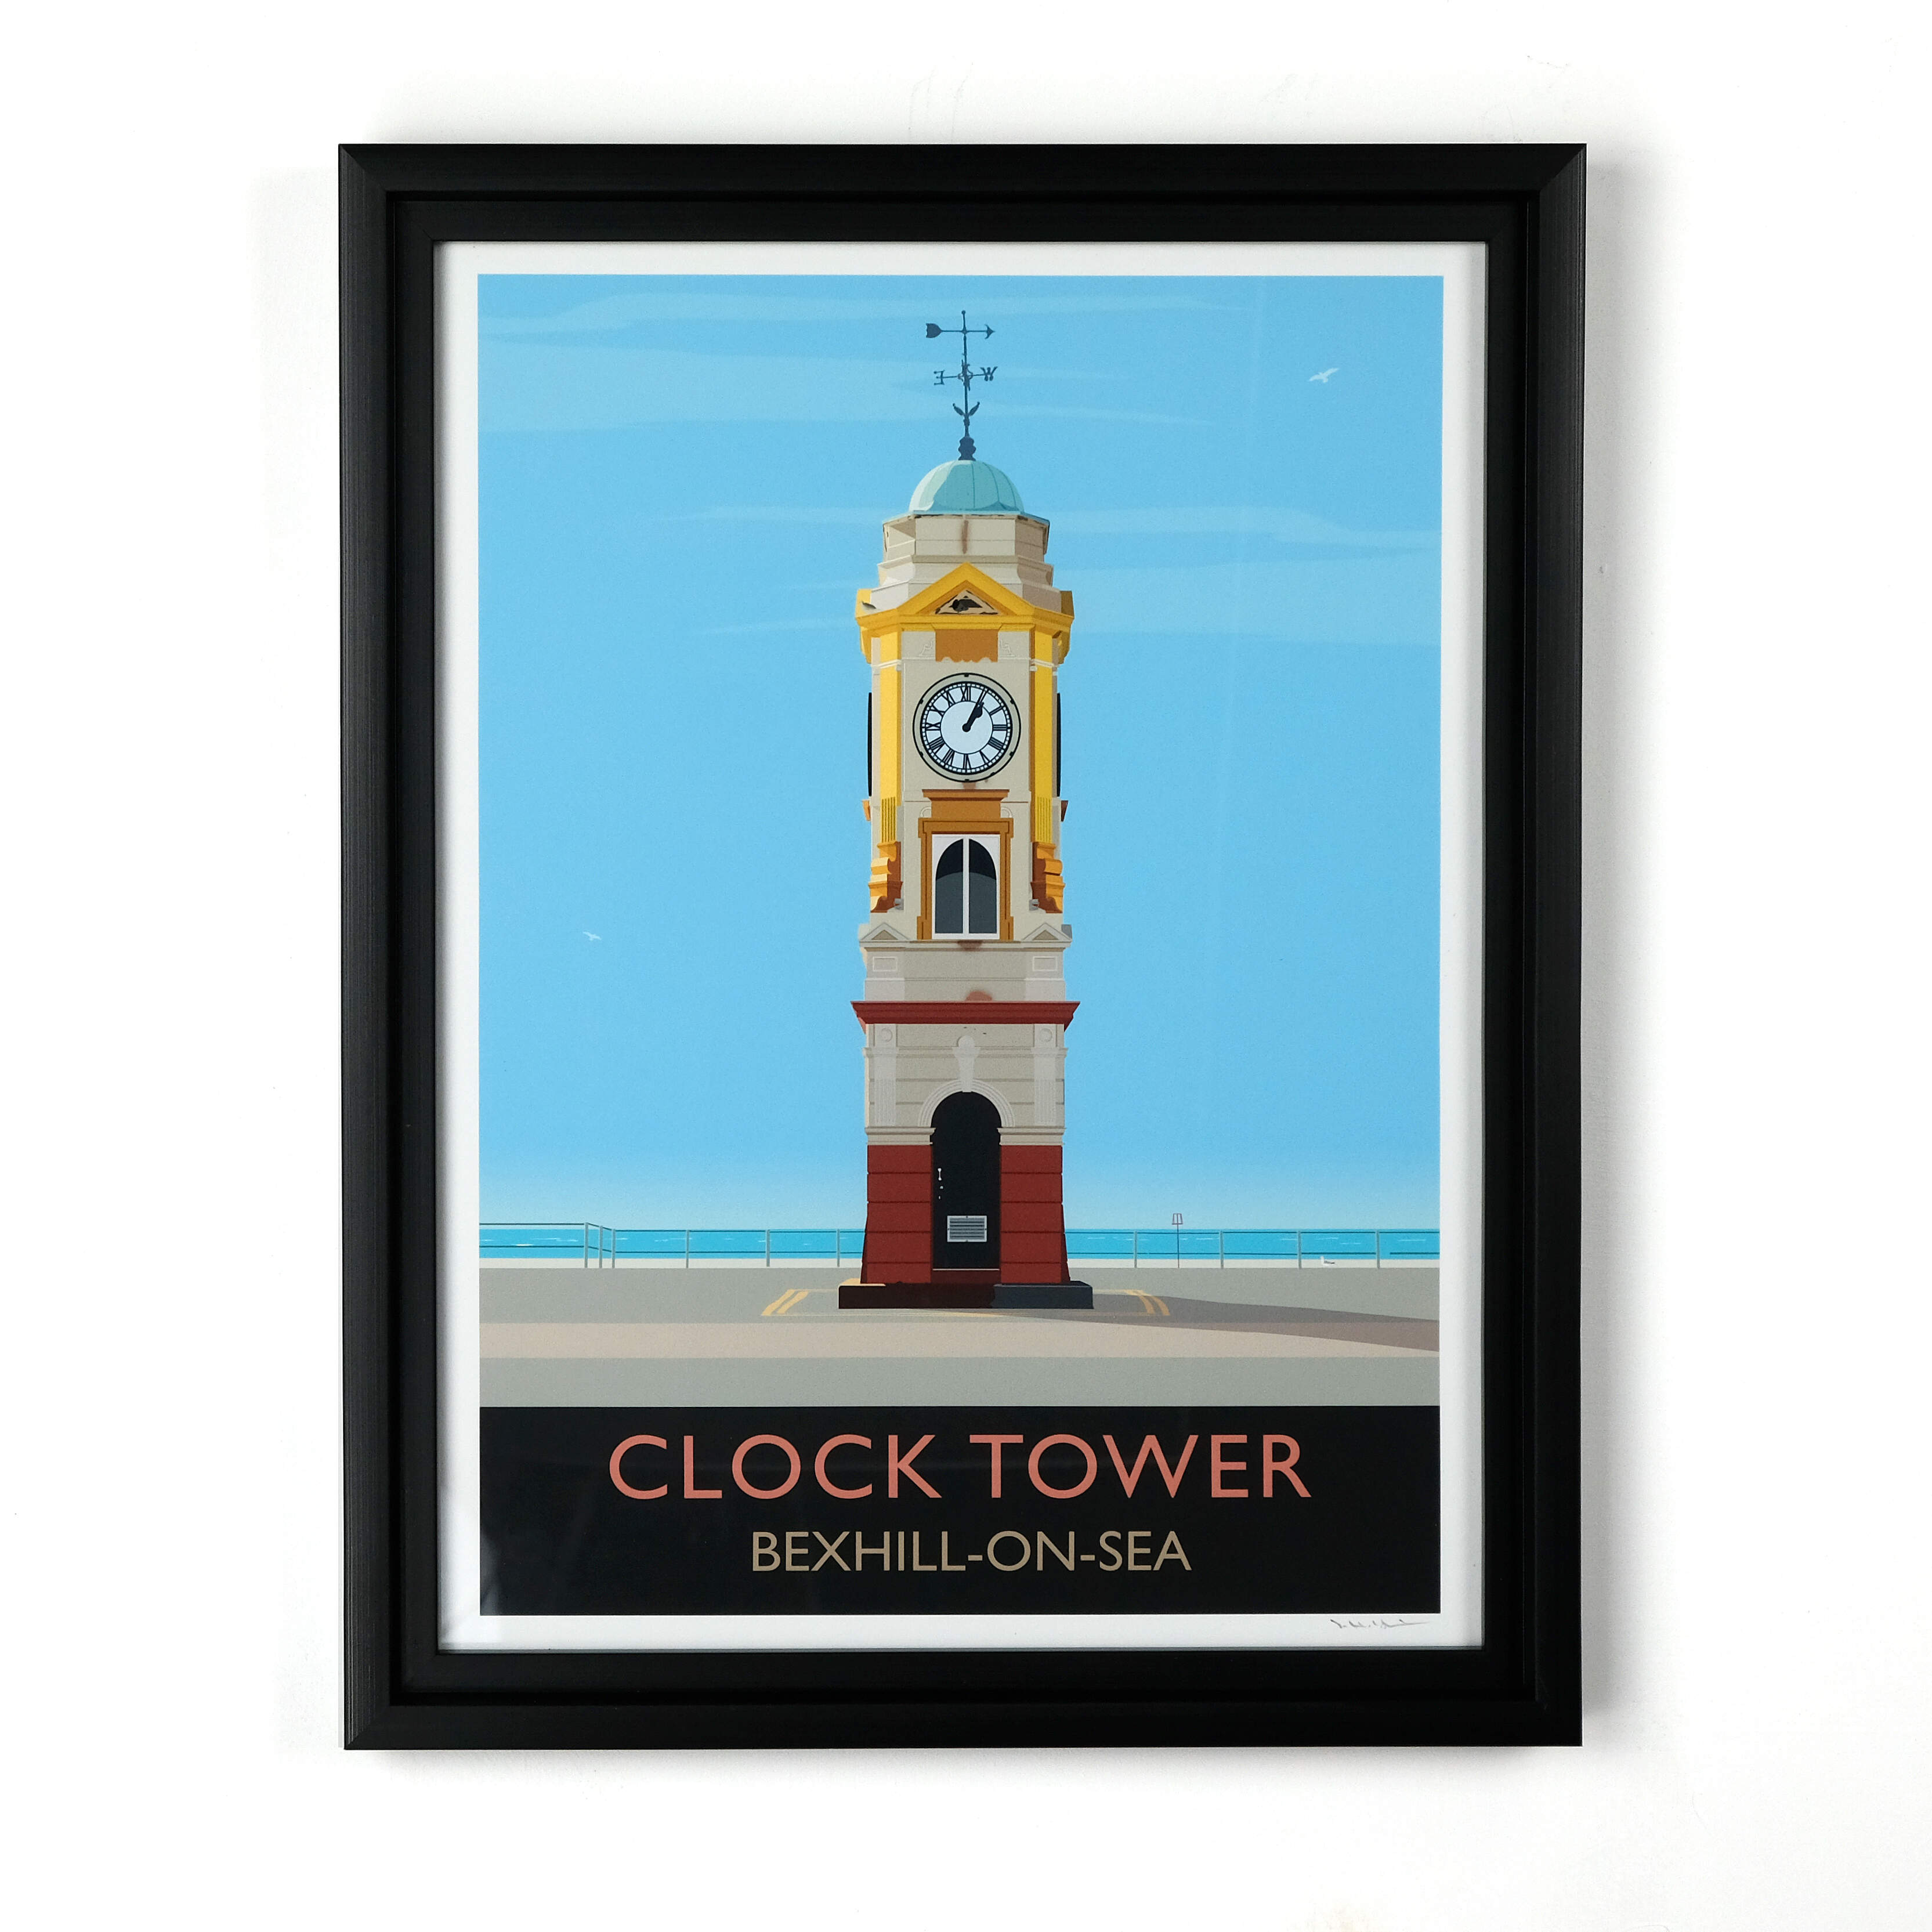 Bexhill Clock Tower